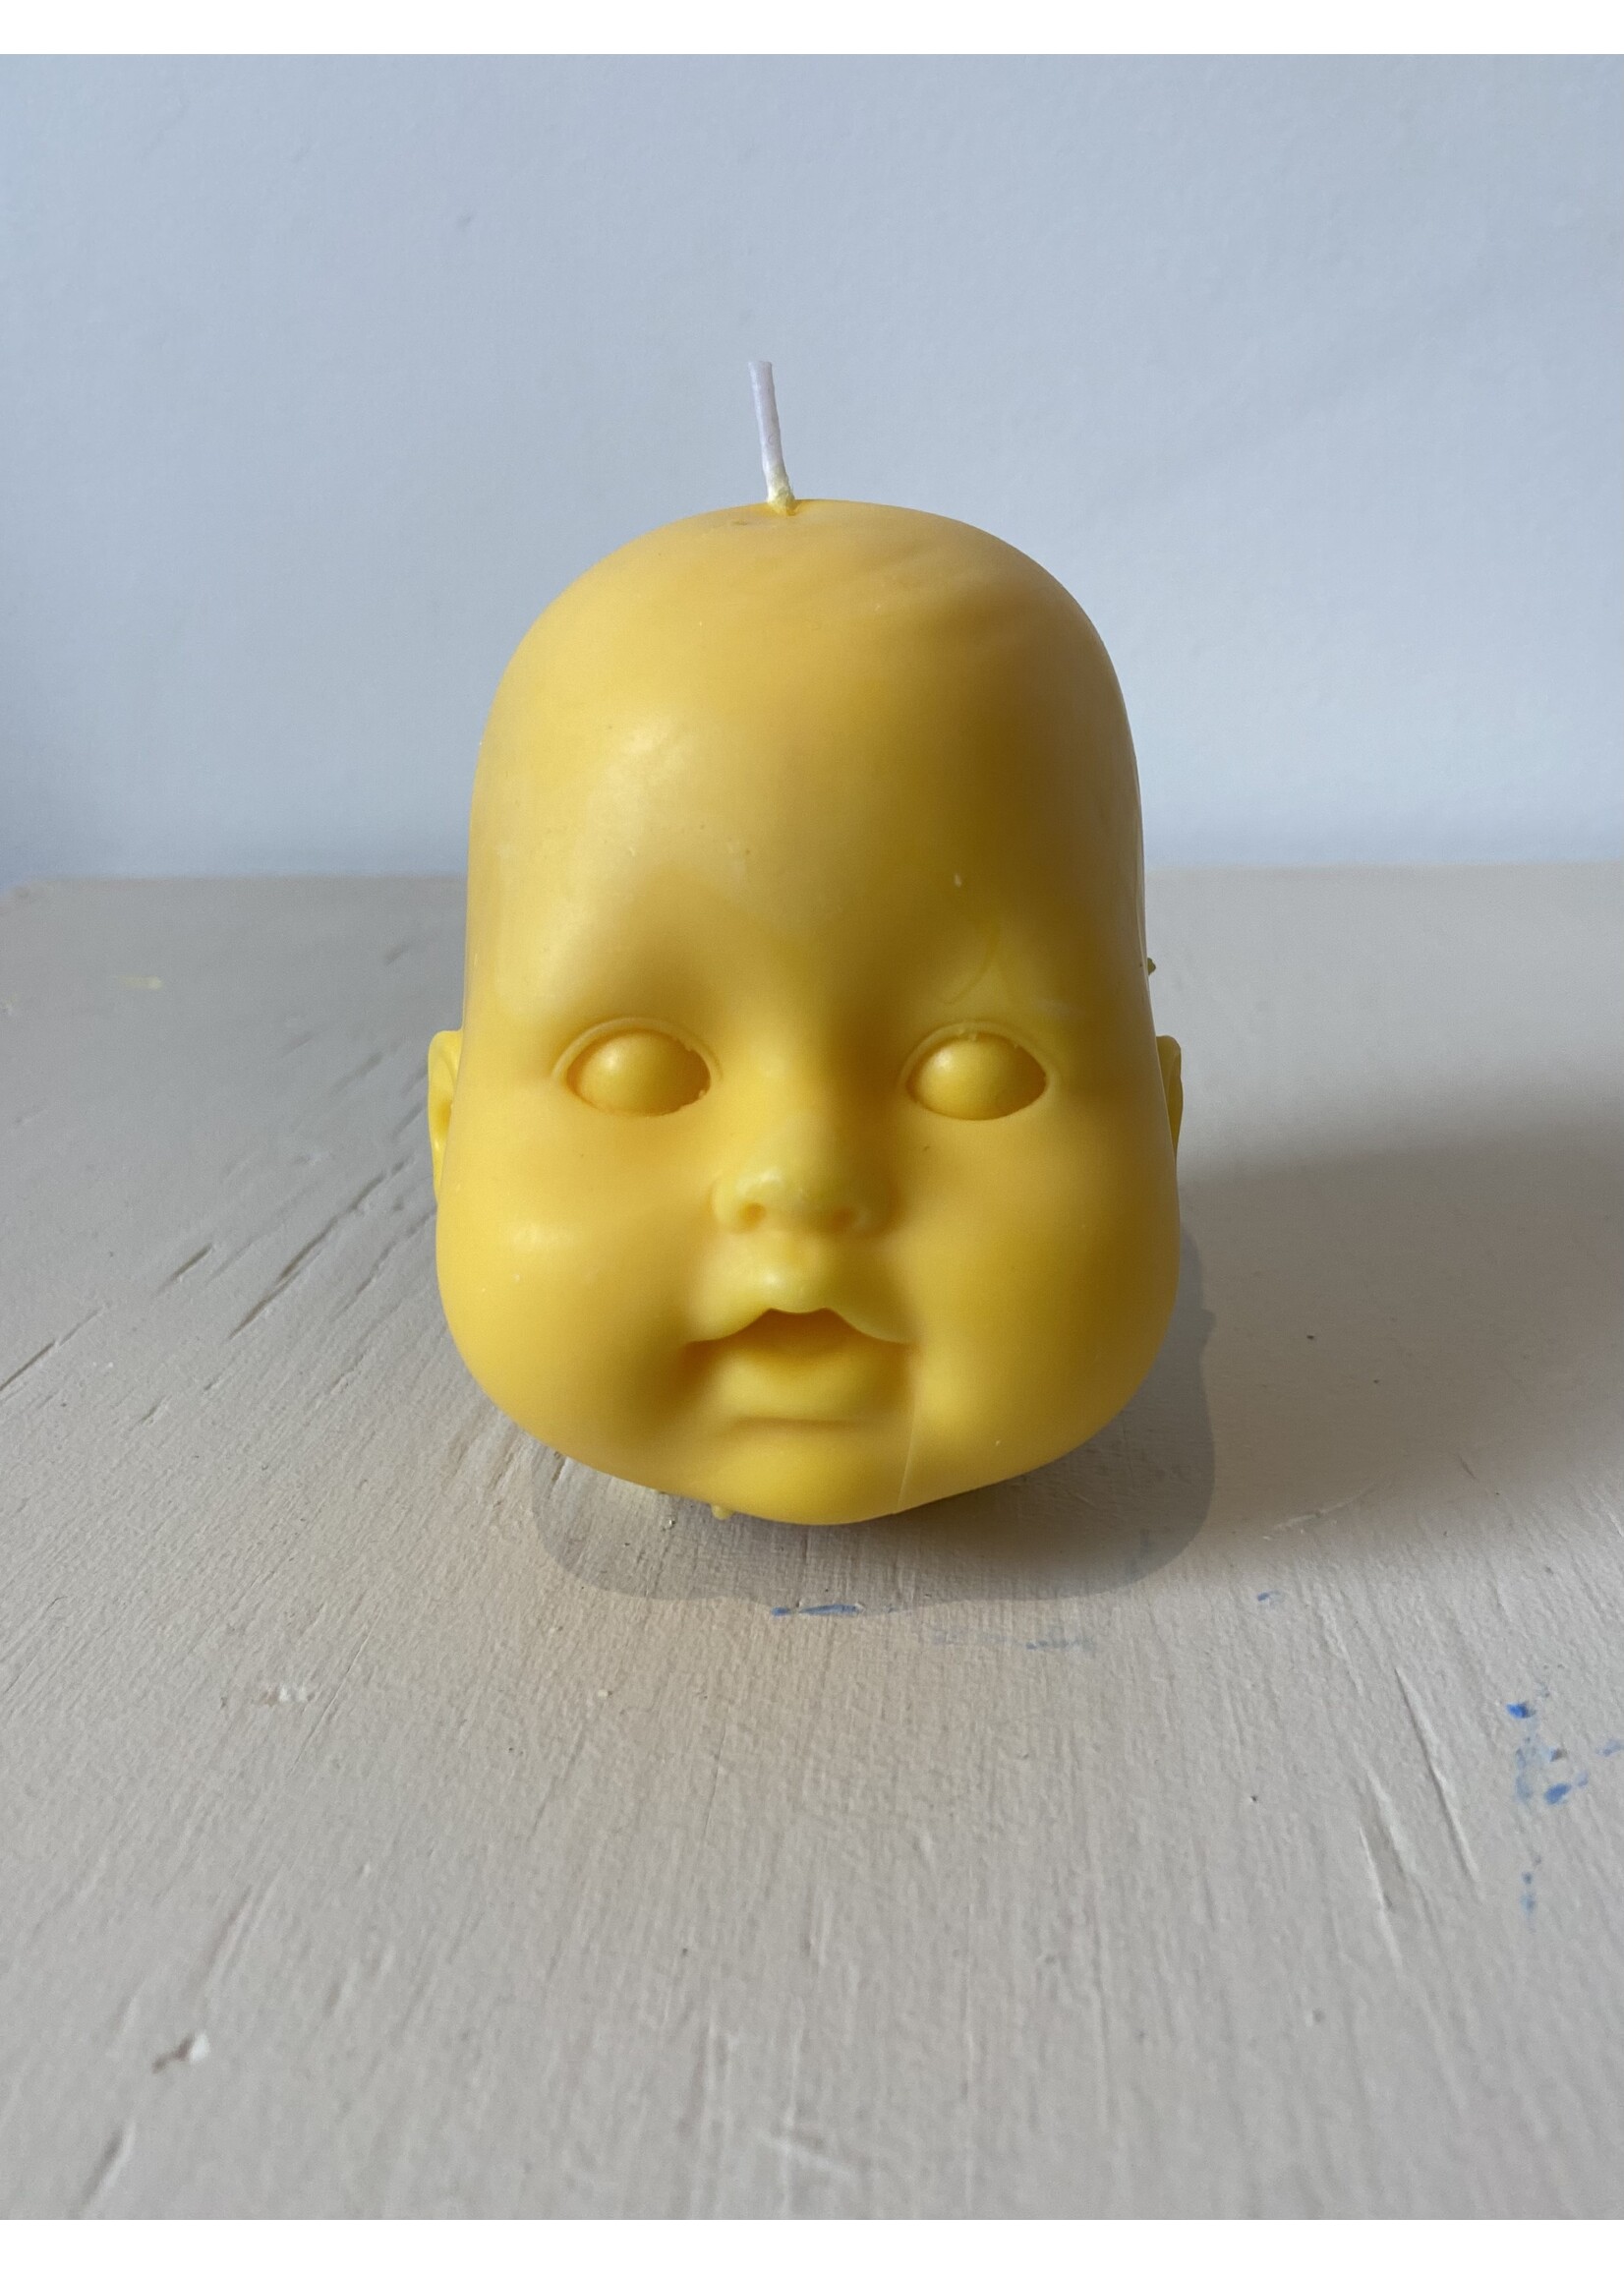 Candle Lume Candles "Creepy Baby Head" by LUME